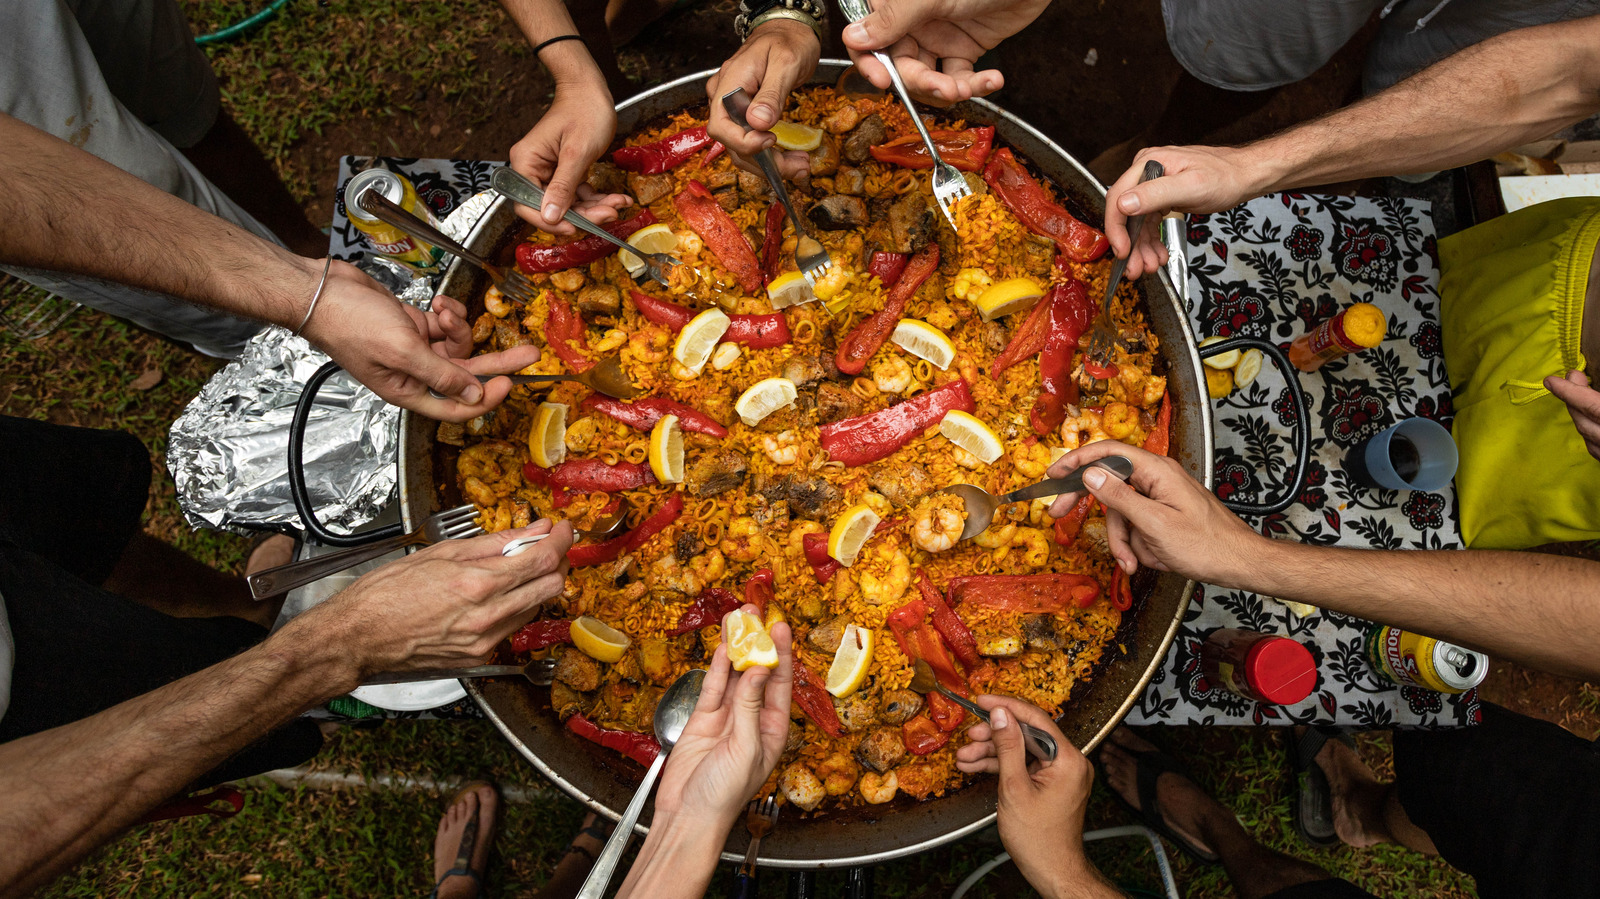 https://www.tastingtable.com/img/gallery/11-tips-you-need-for-cooking-paella/l-intro-1696275060.jpg